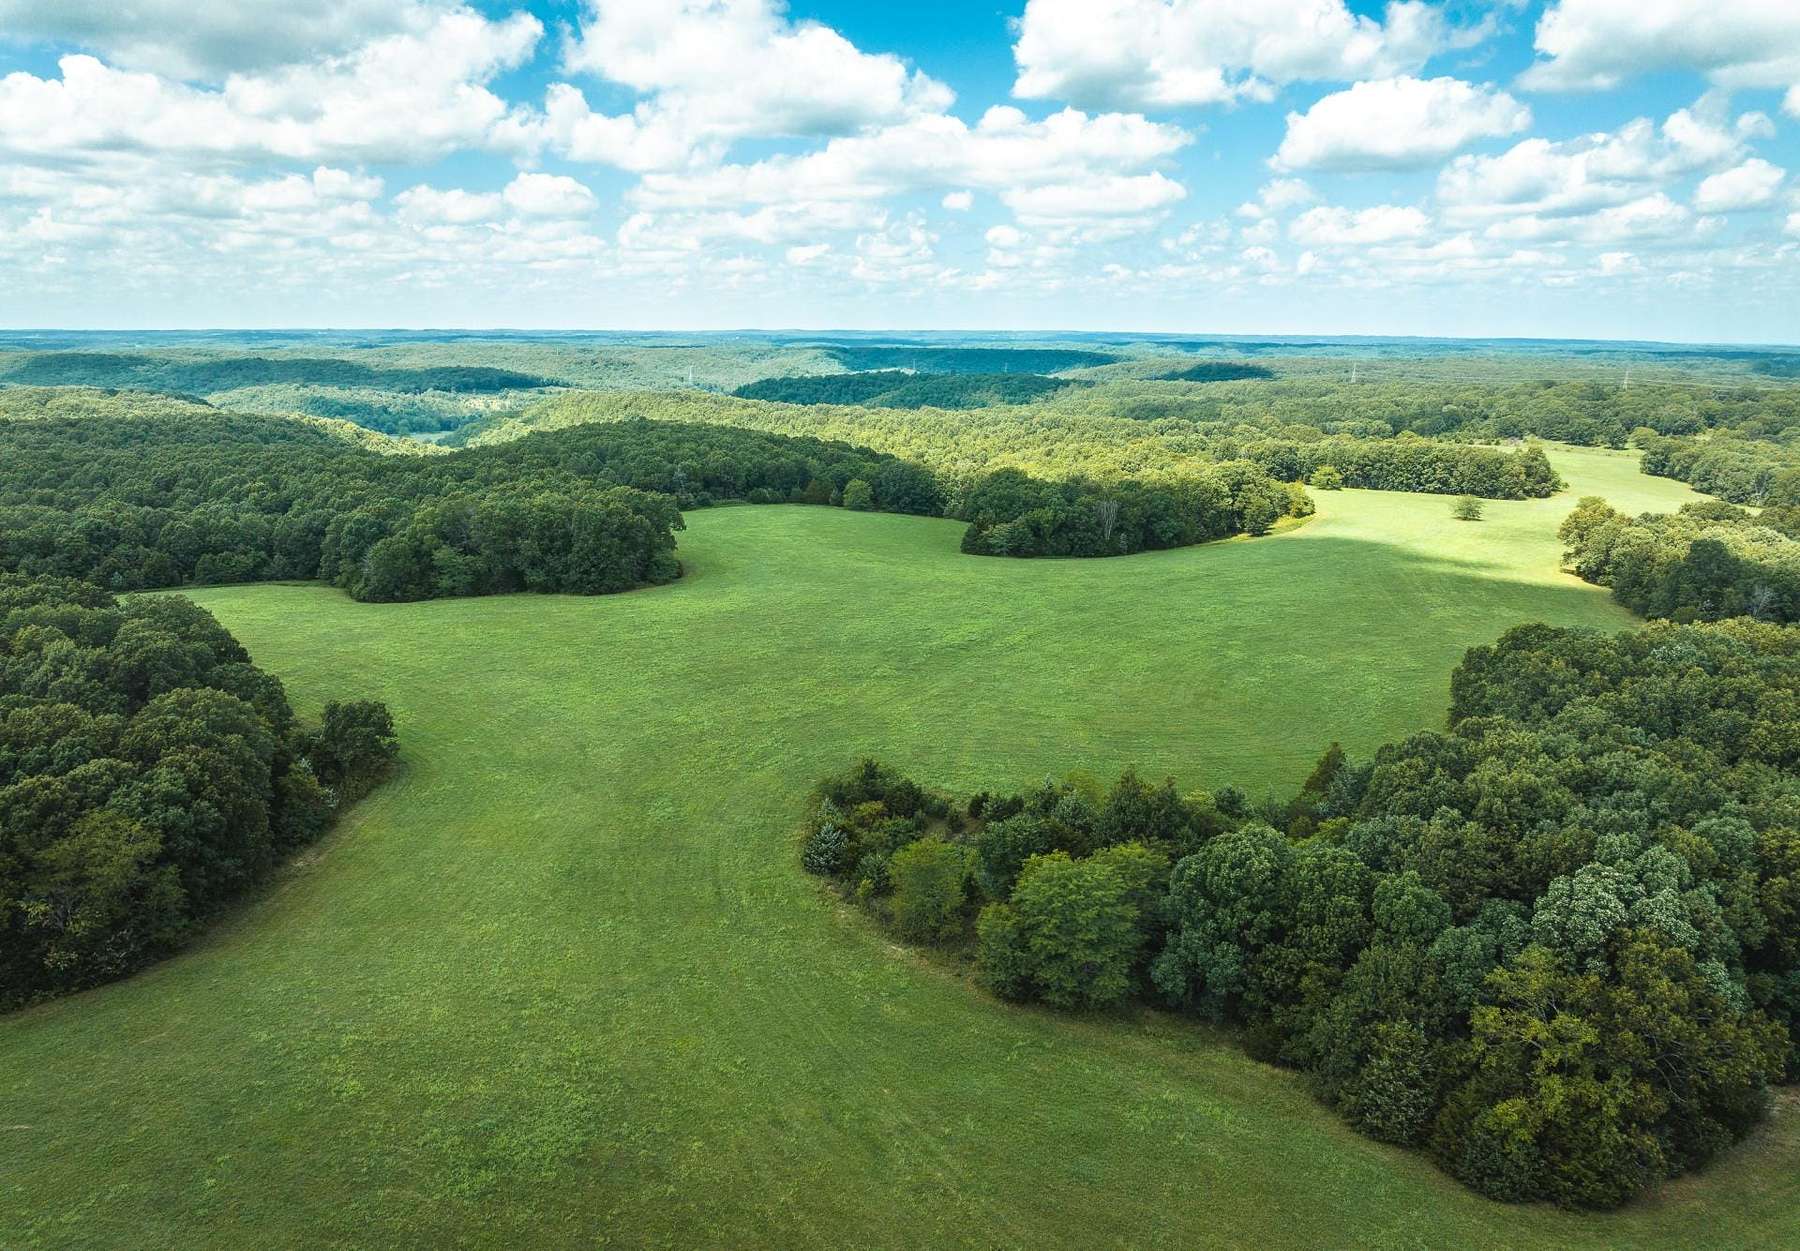 73 Acres of Recreational Land for Sale in Rolla, Missouri